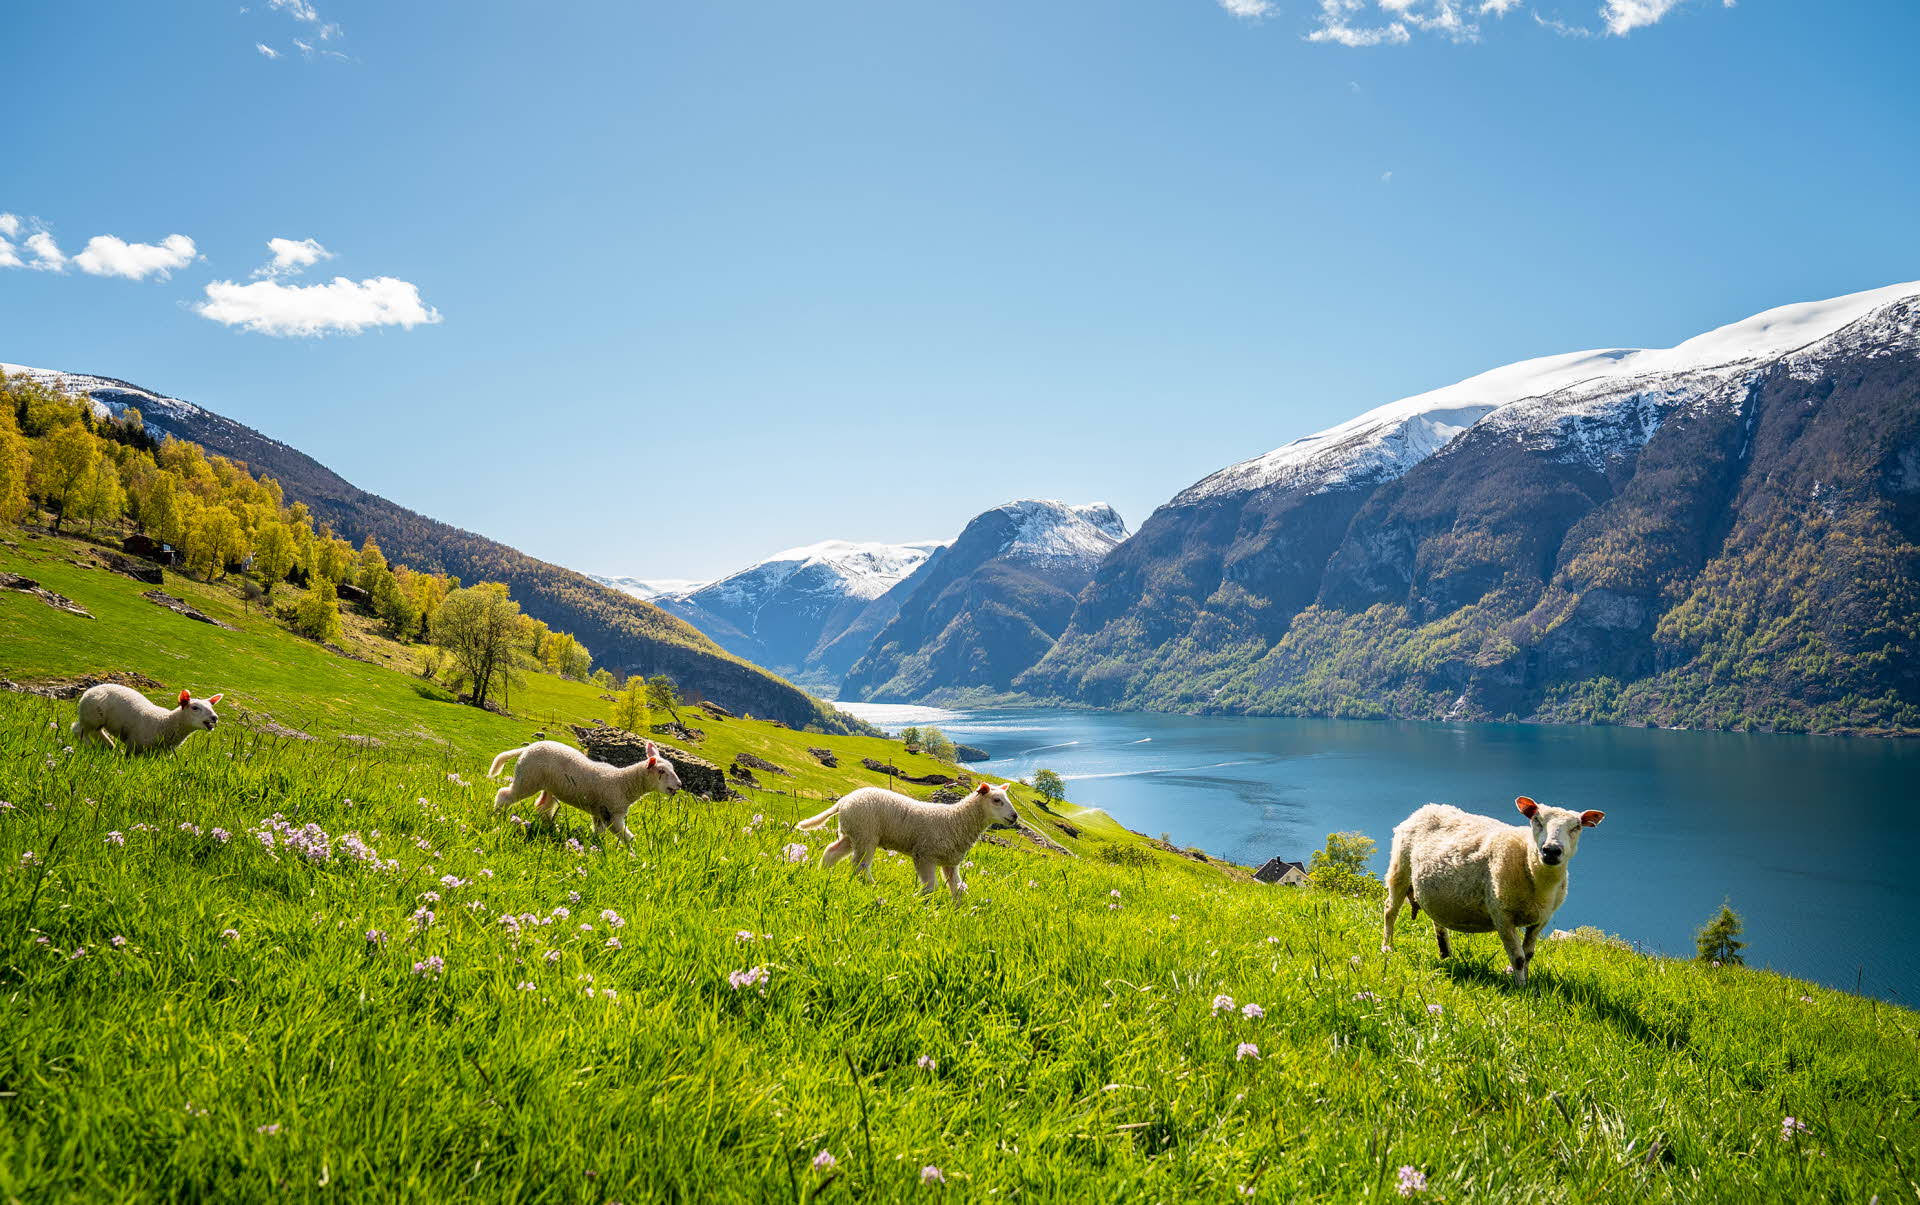 Sheep graze in flowering meadows with views over the World Heritage-listed Aurlandfjord with snow-capped peaks